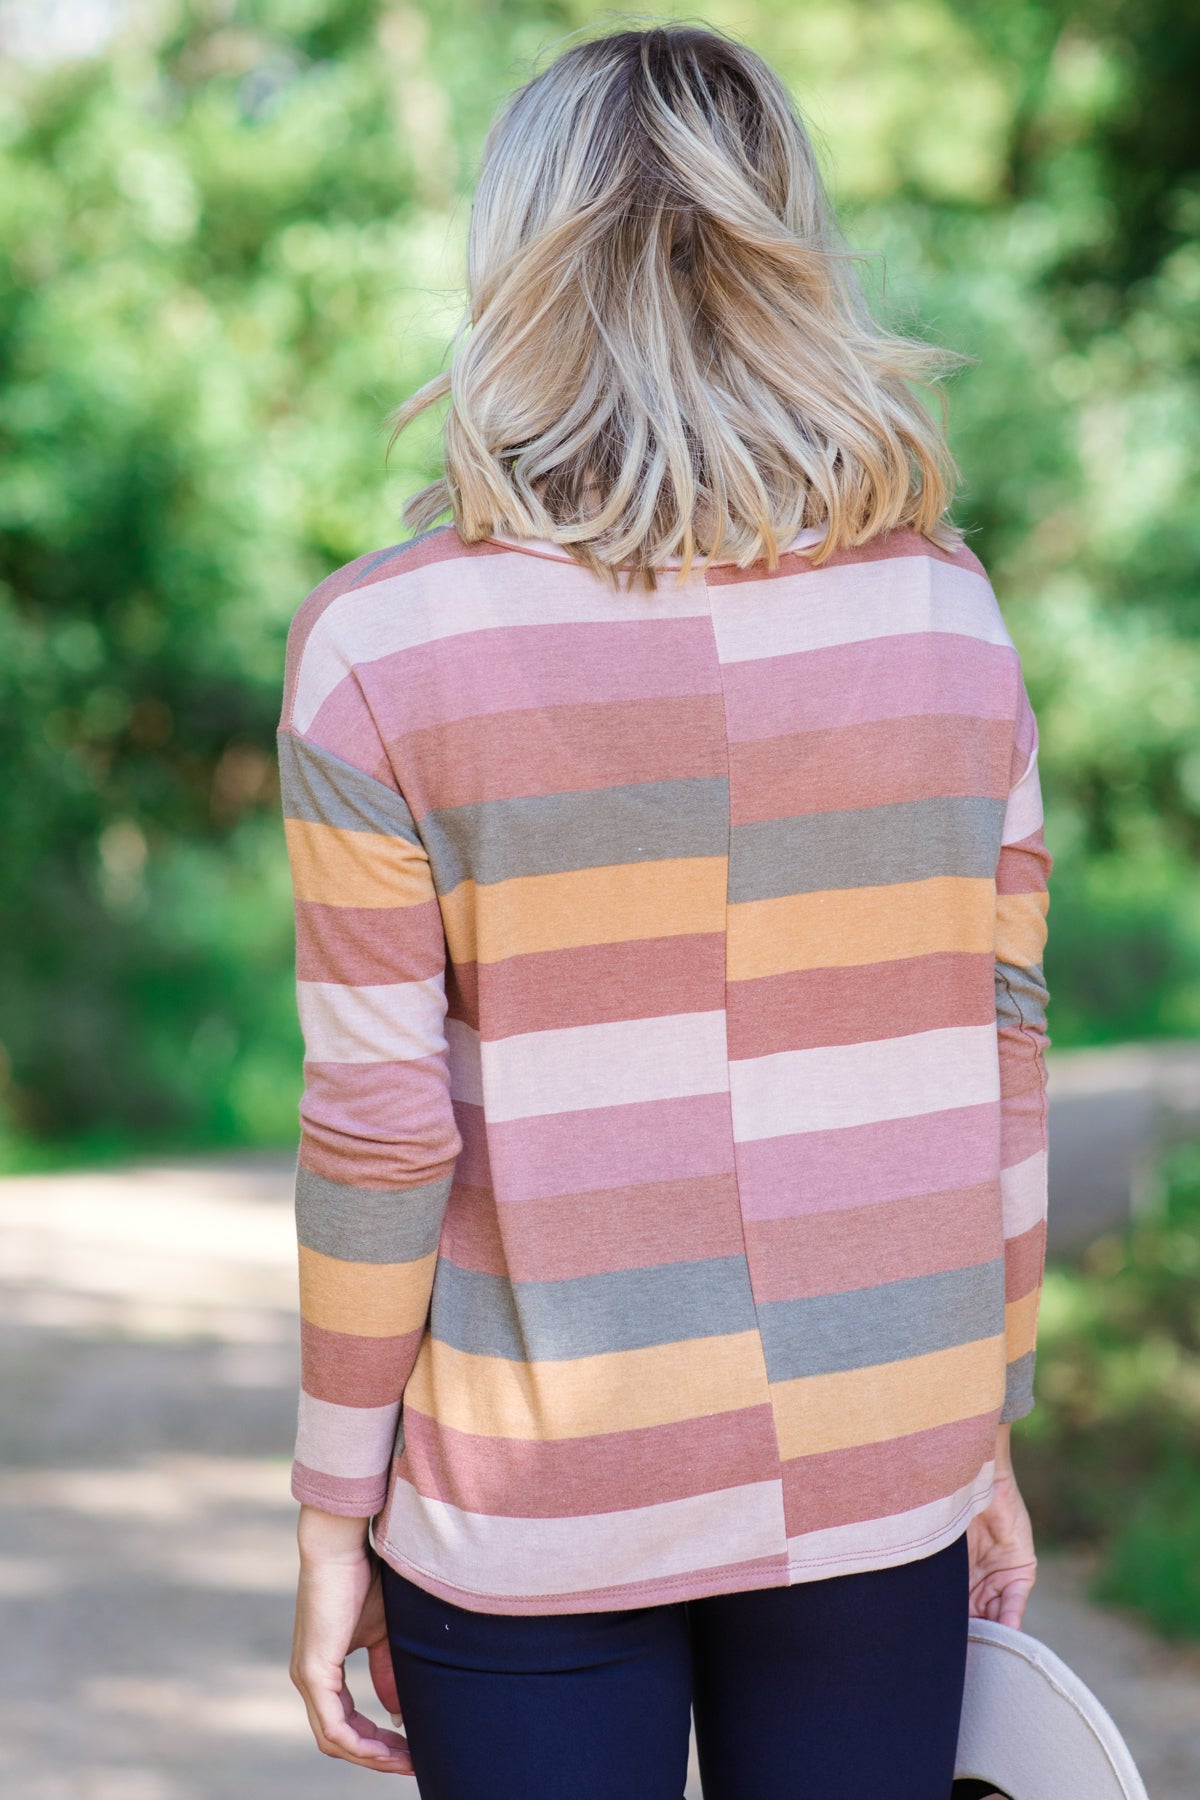 Terra Cotta and Mustard Multicolor Stripe Top - Filly Flair